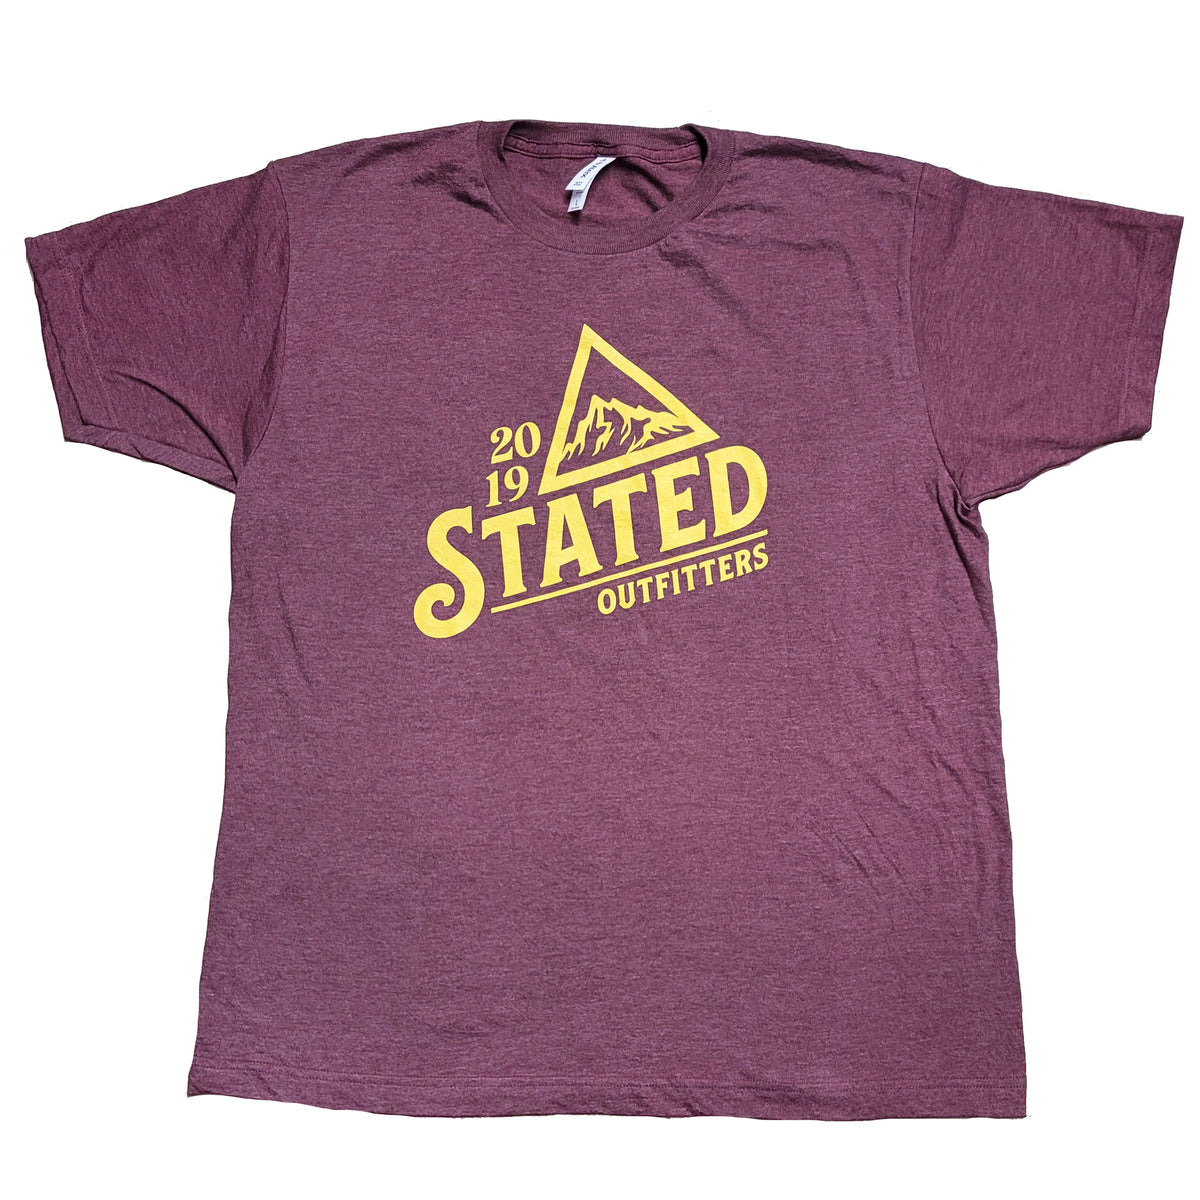 Stated Outfitters Tilt Tee